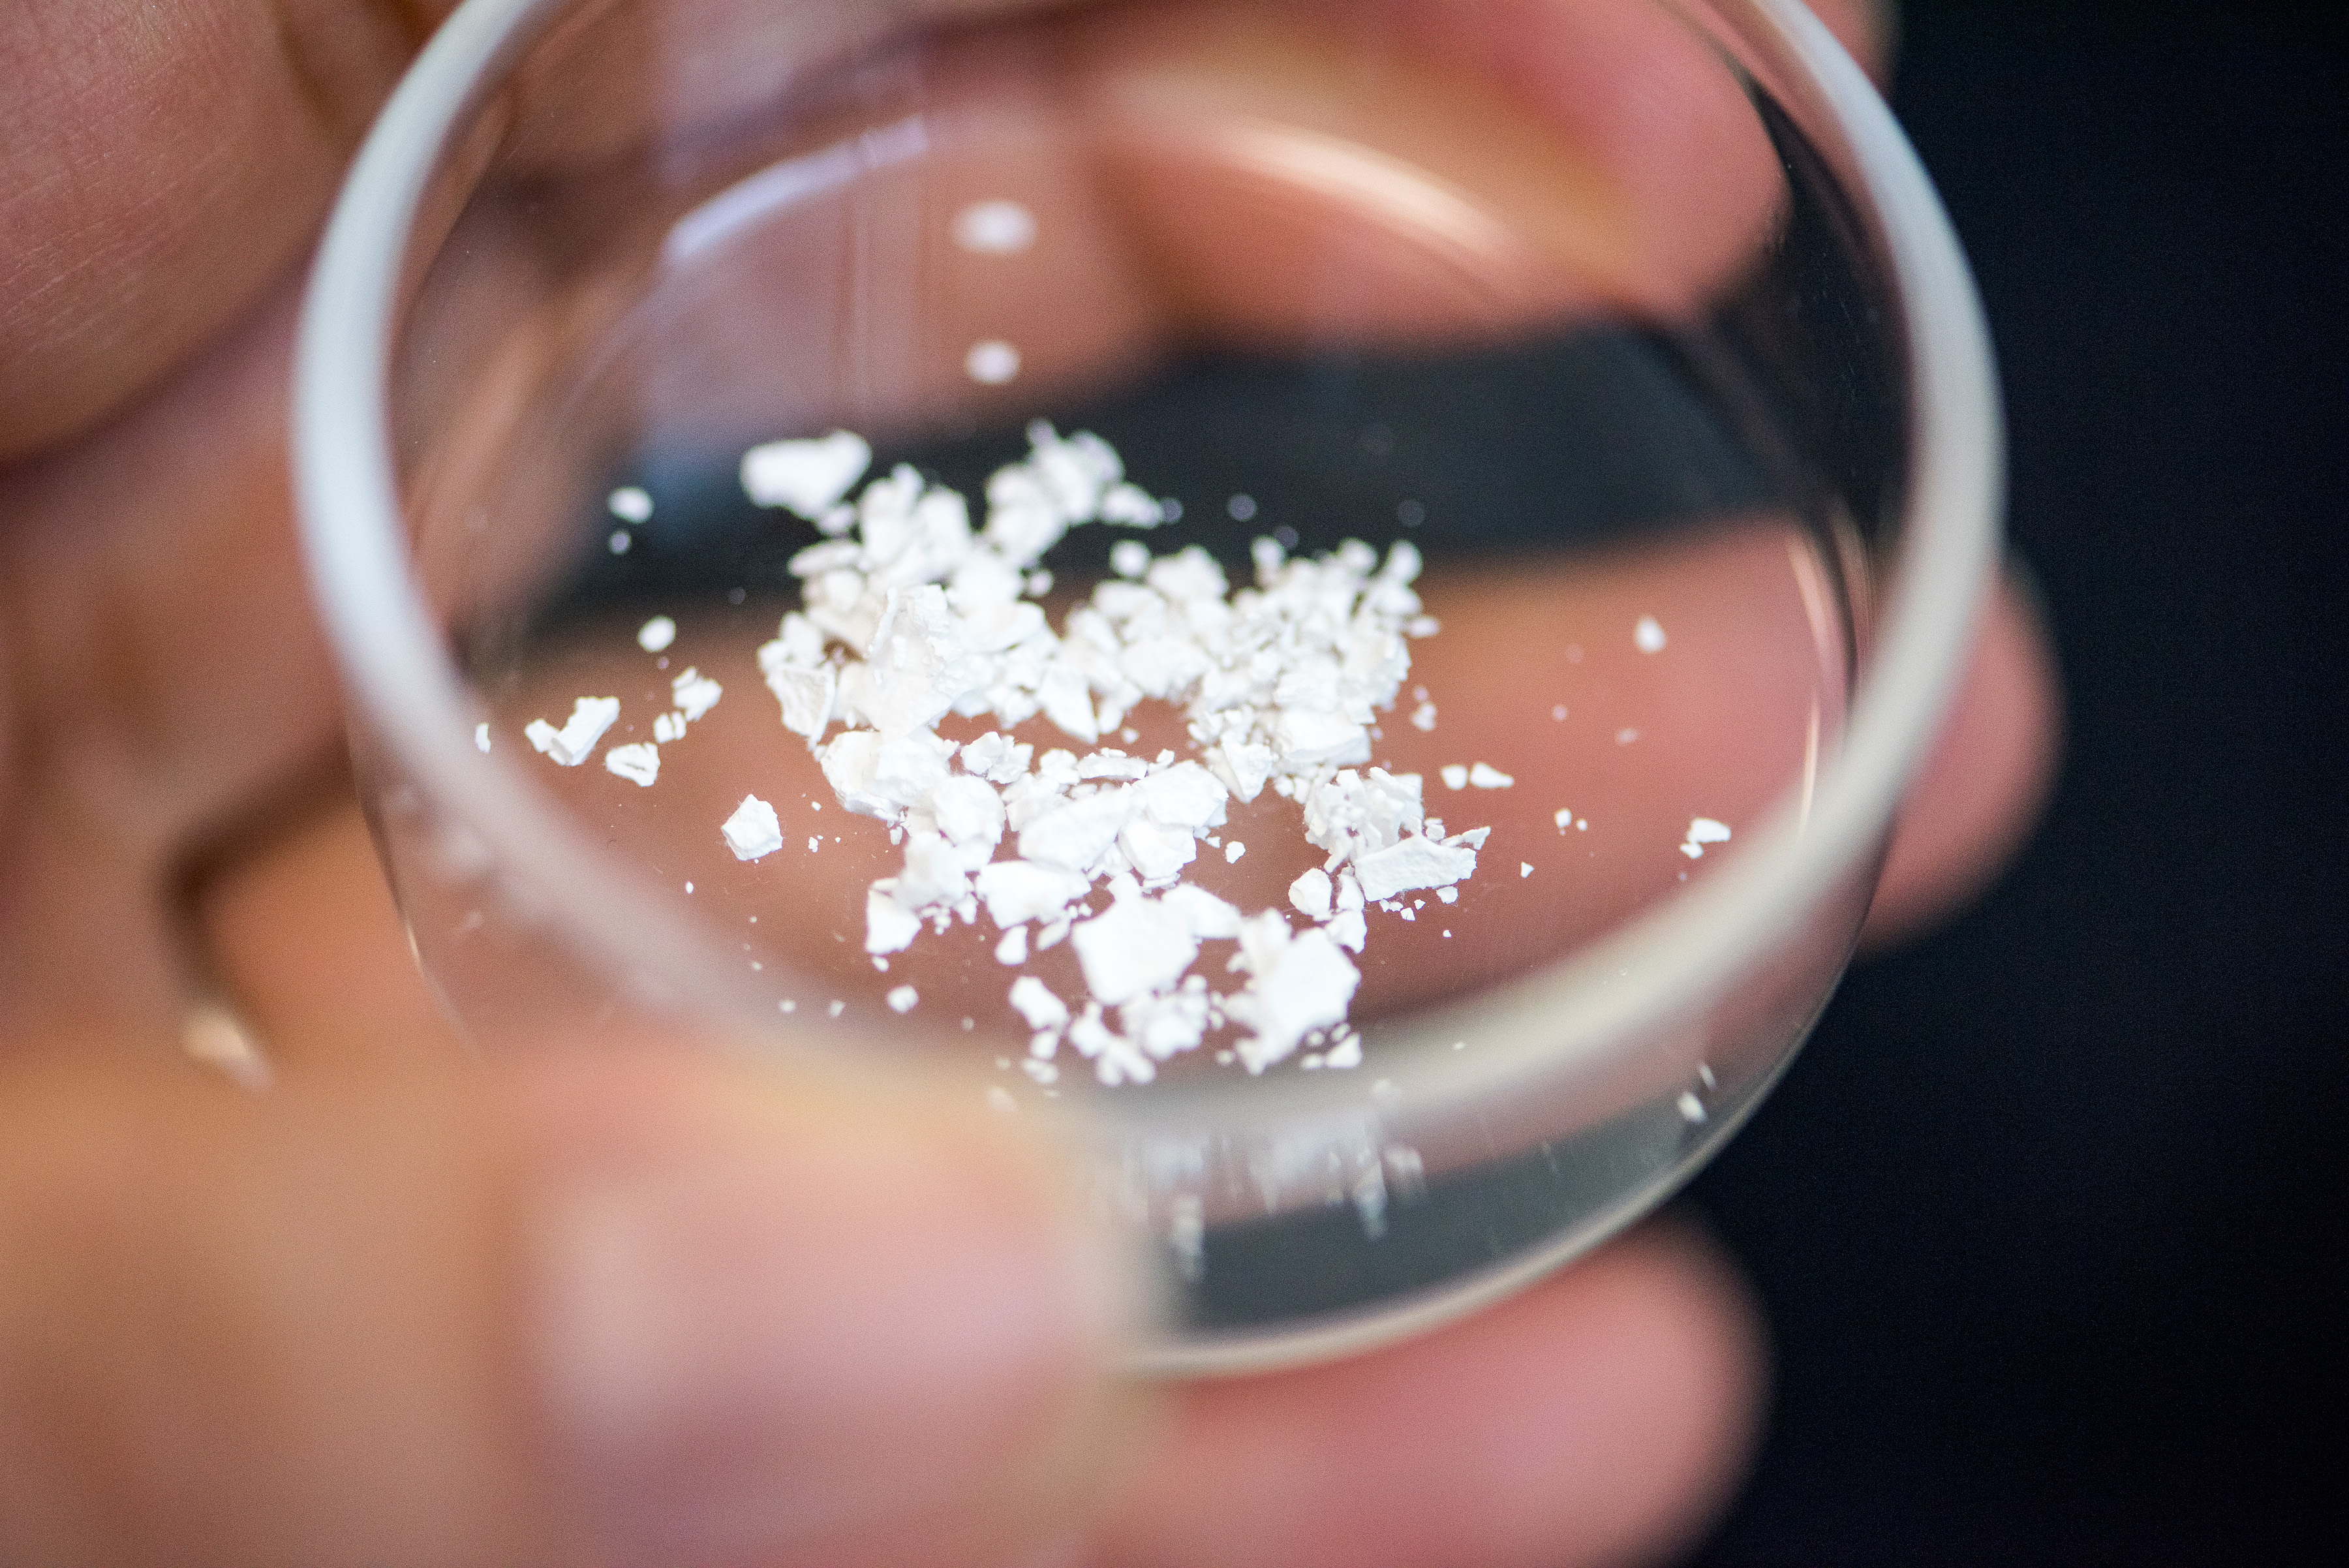 Ensilicated proteins in powder form (University of Bath/PA)